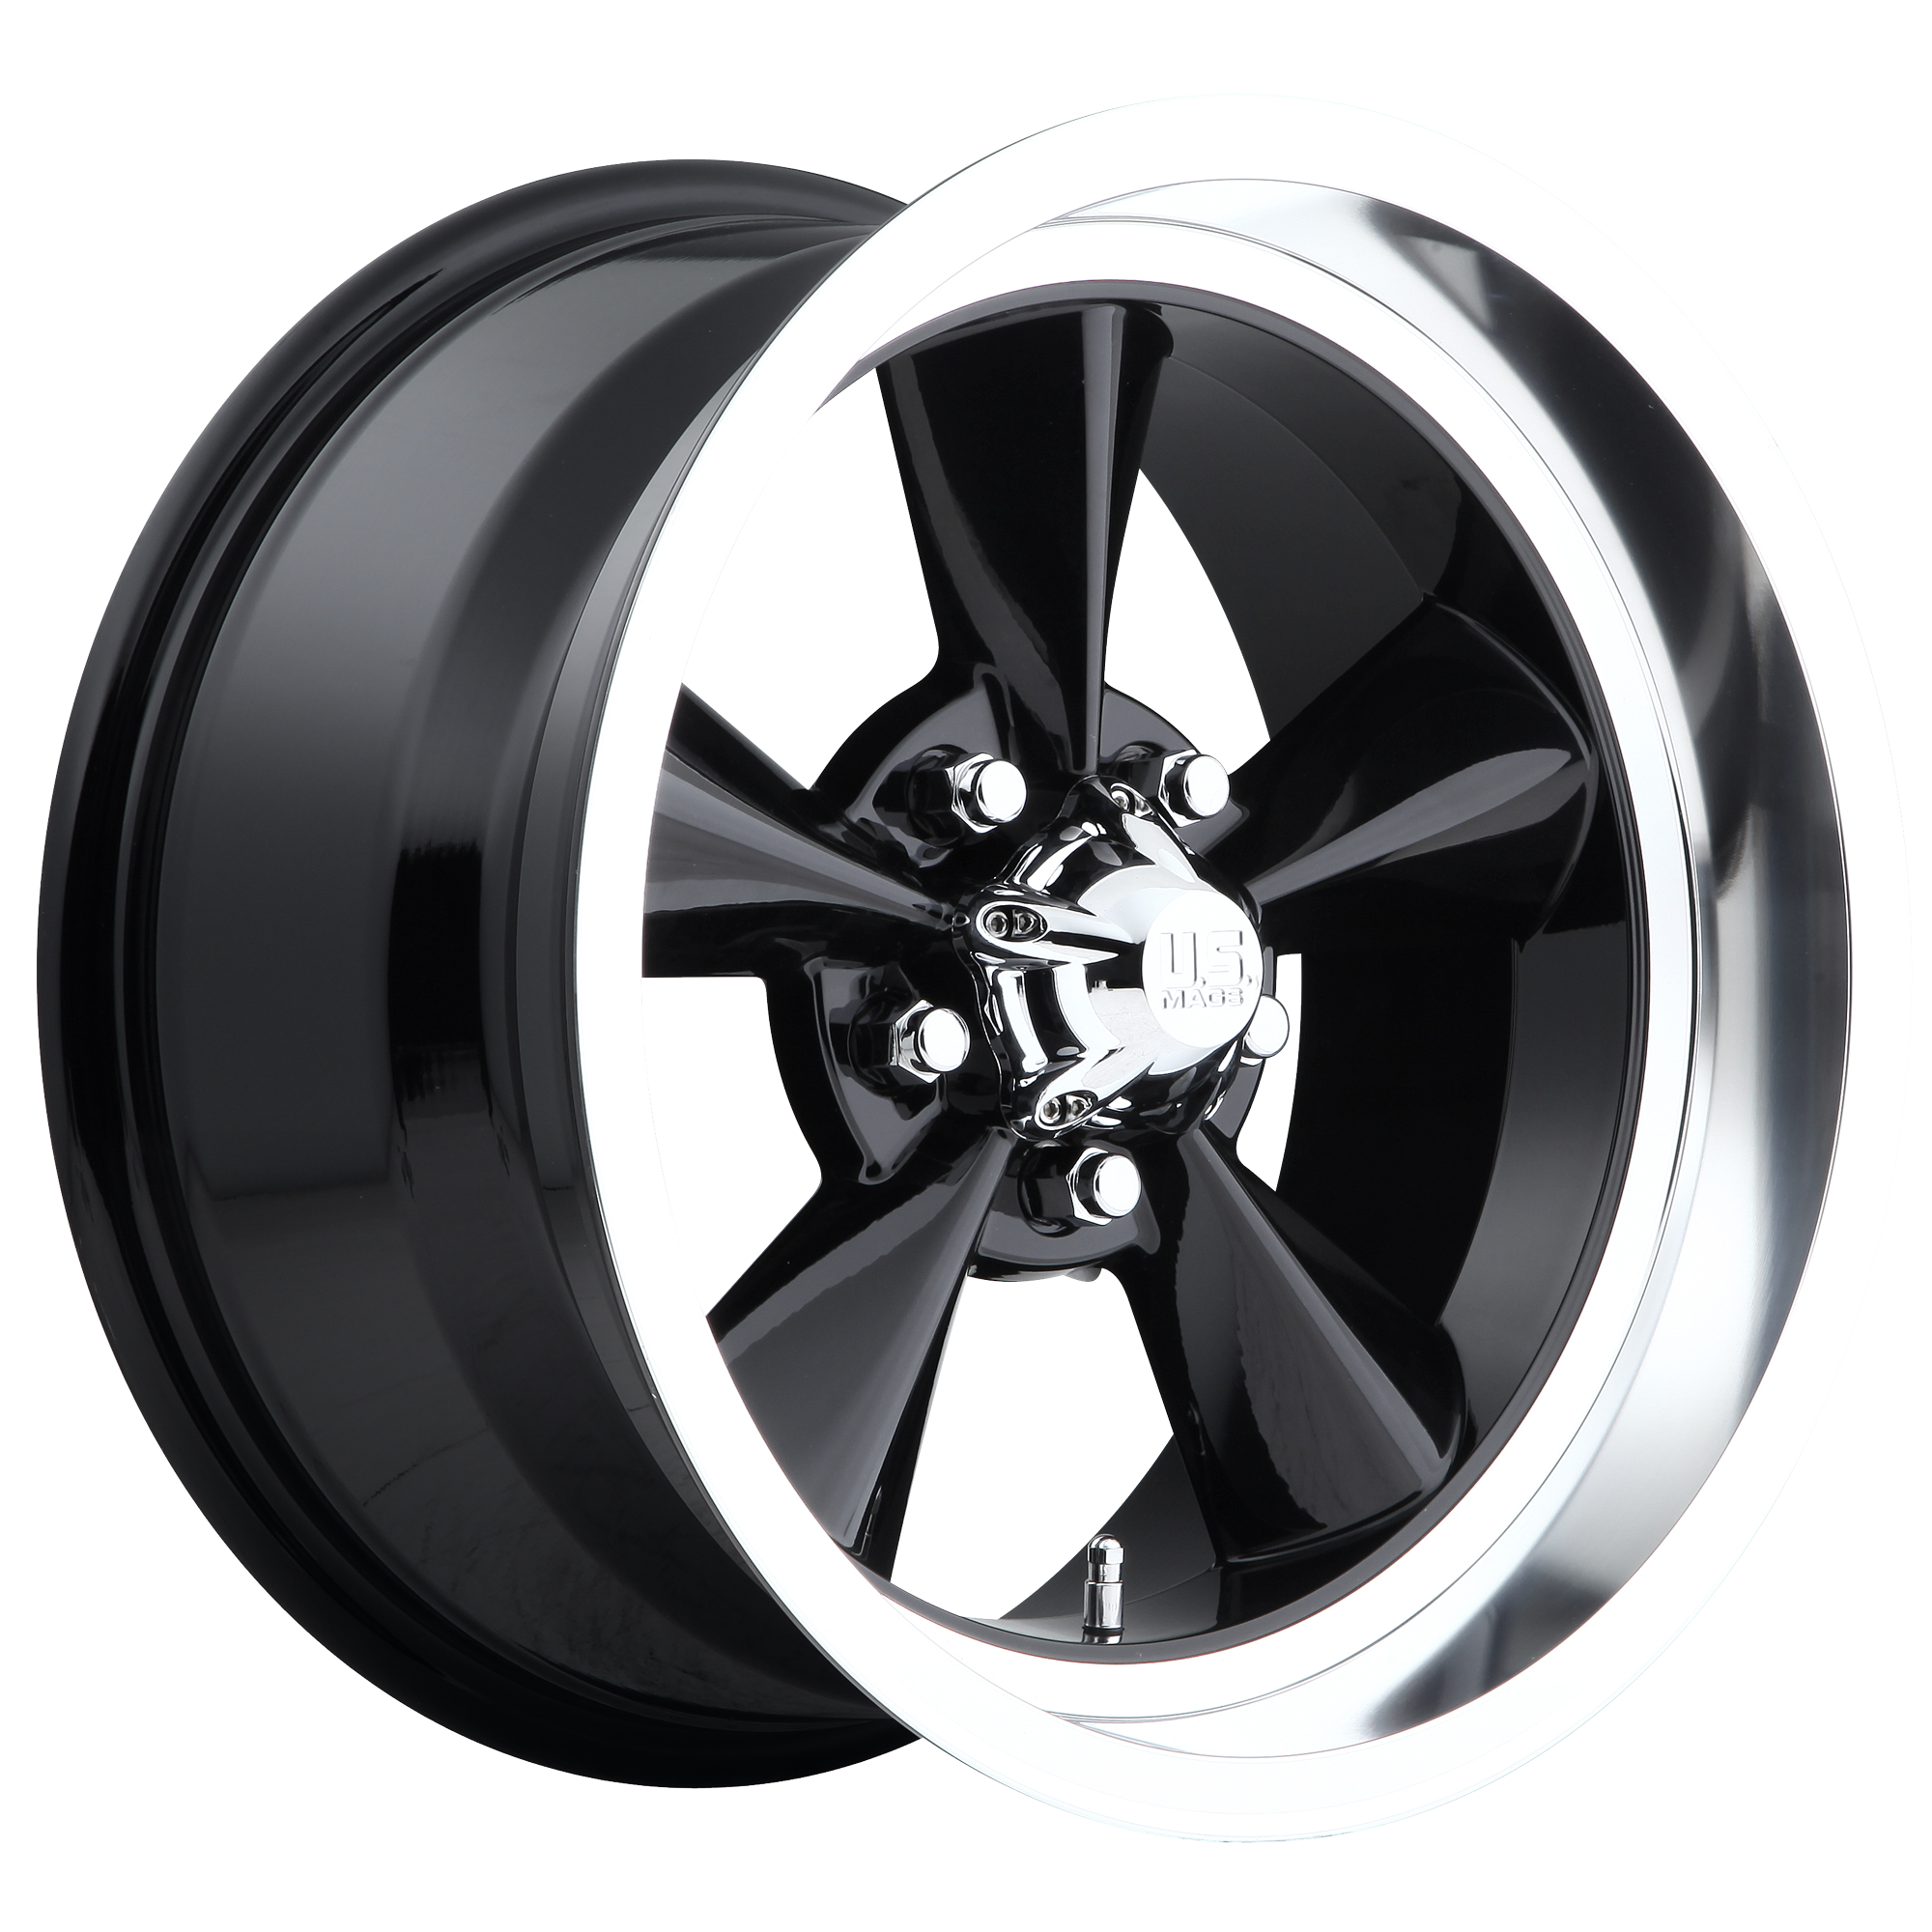 STANDARD 18x8 5x120.65 GLOSS BLACK (1 mm) - Tires and Engine Performance